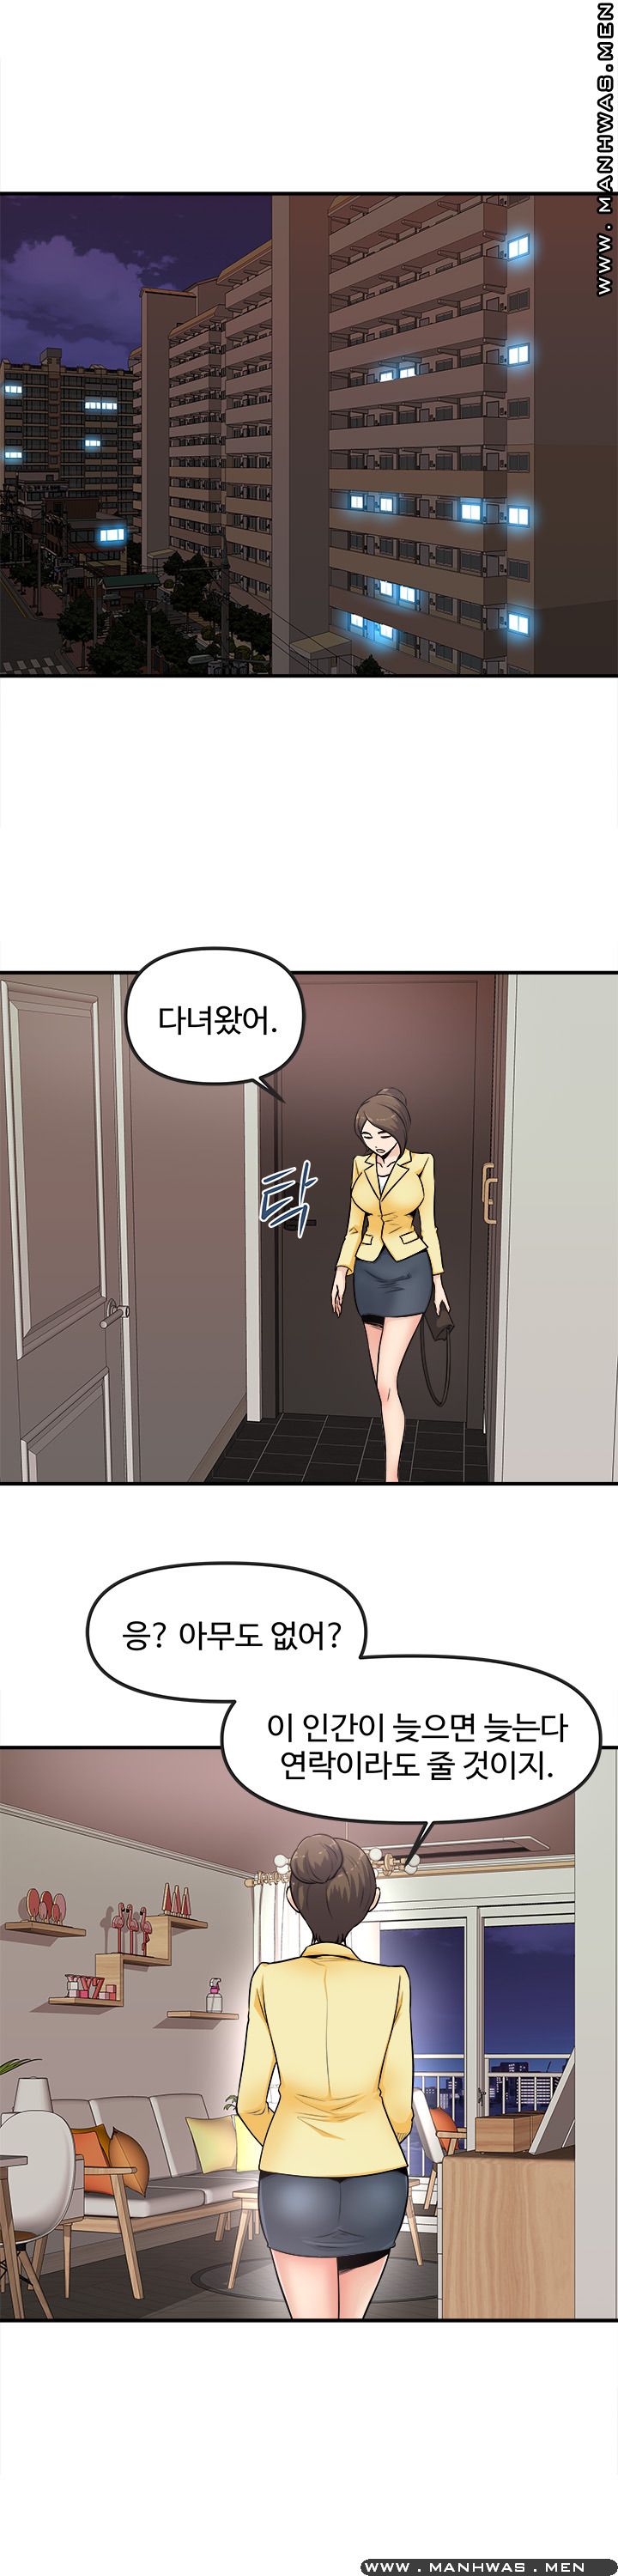 Office Bible Raw - Chapter 3 Page 1